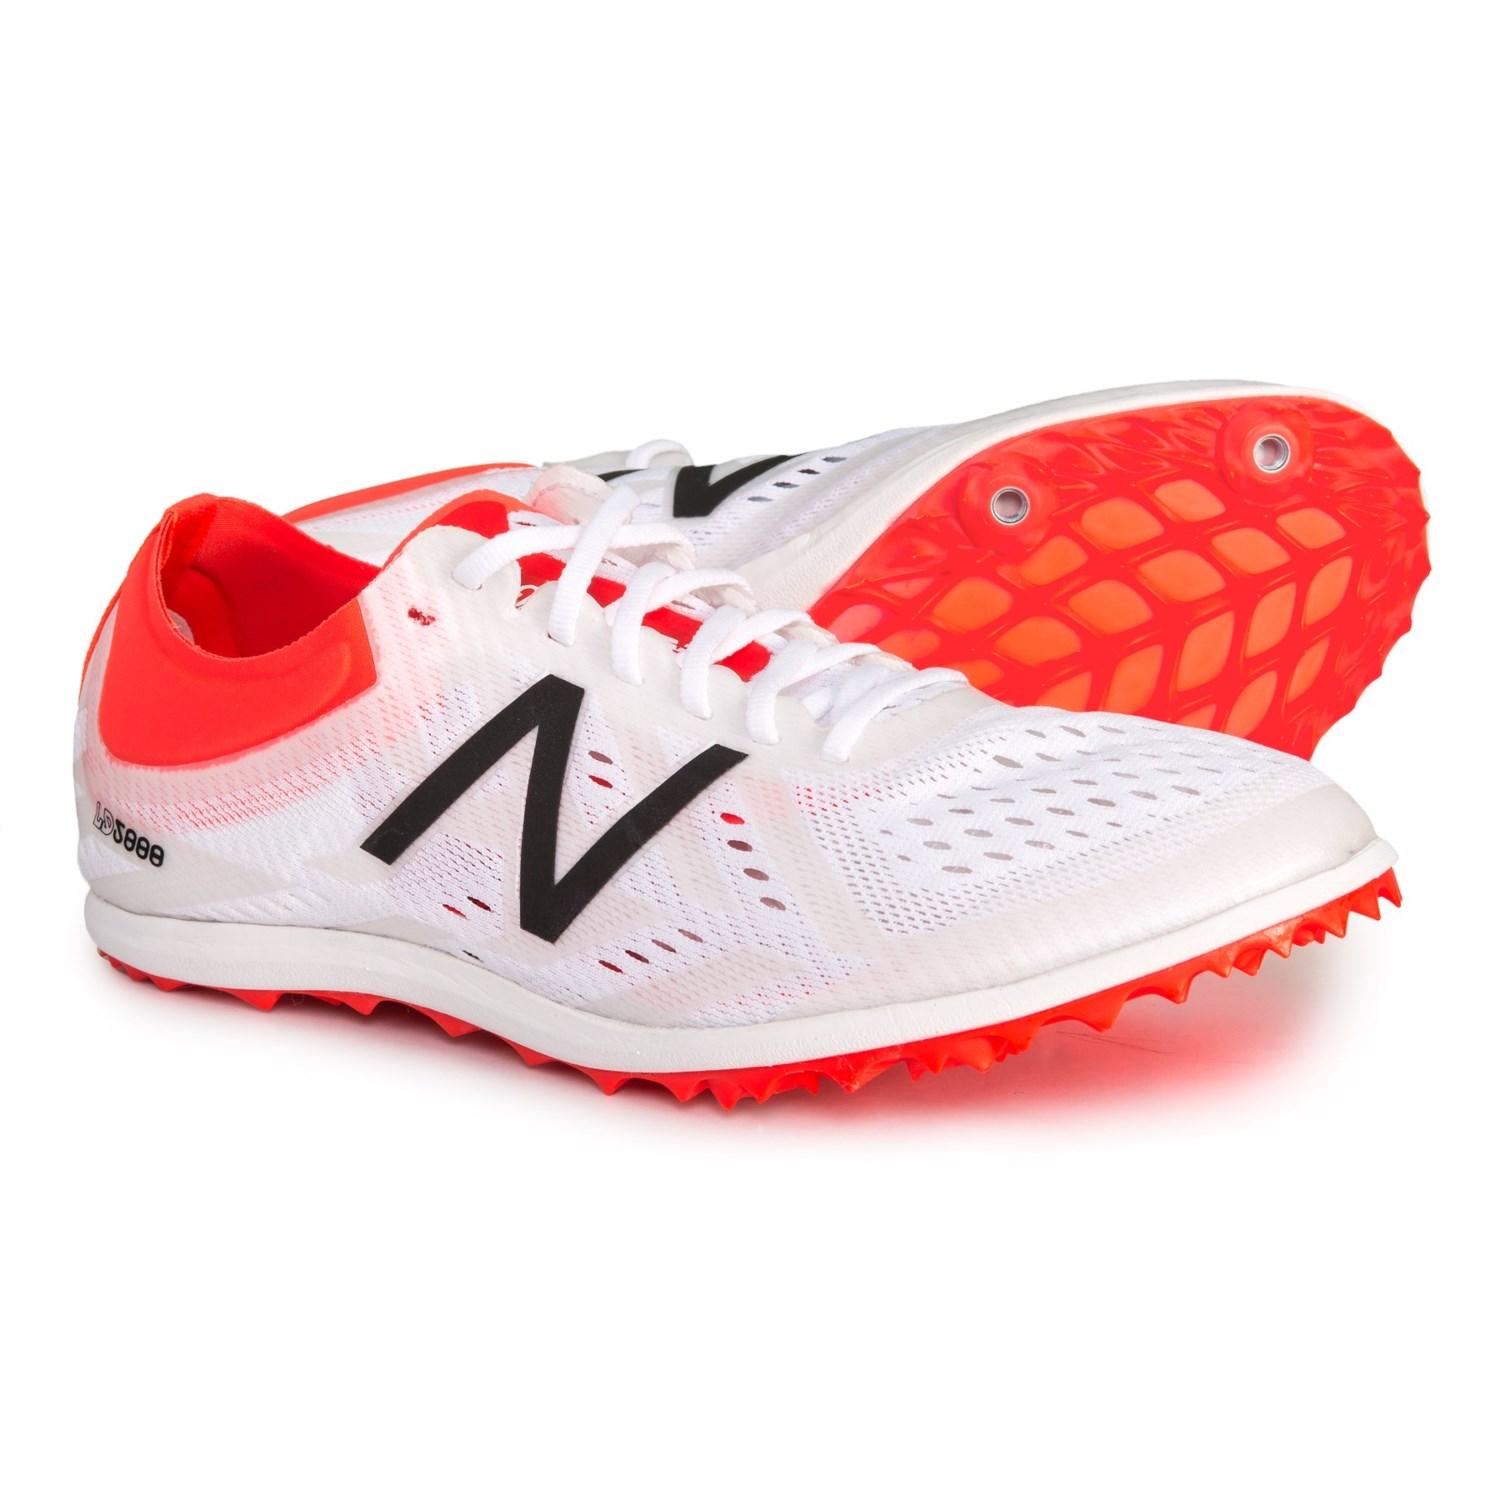 Privilegio puesta de sol Desde allí New Balance Synthetic Ld5000 V5 Track Spike Running Shoes in White ...